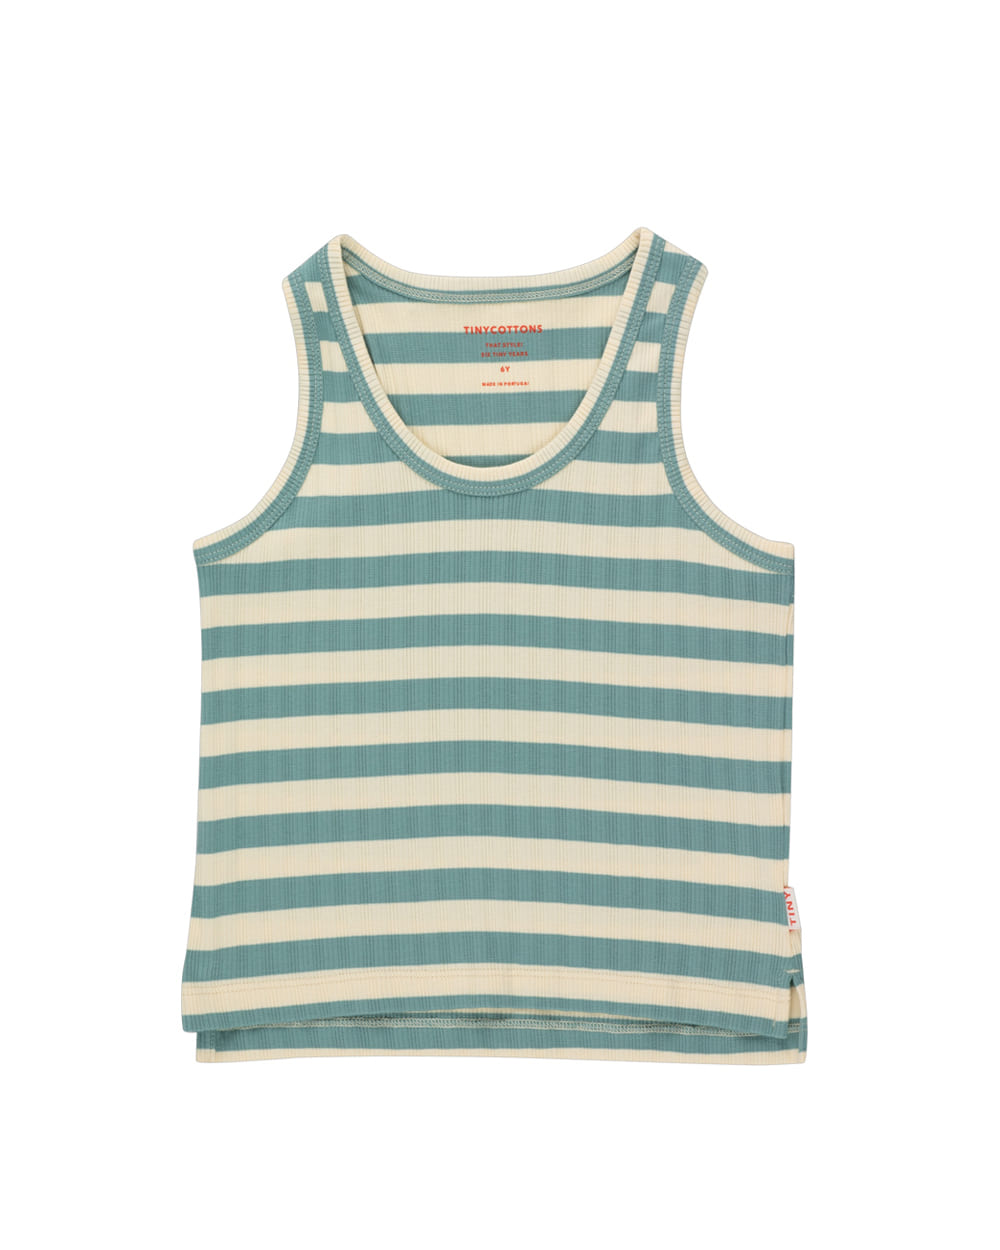 [TINYCOTTONS]STRIPES TANK TOP /pastel yellow/light teal [4Y]